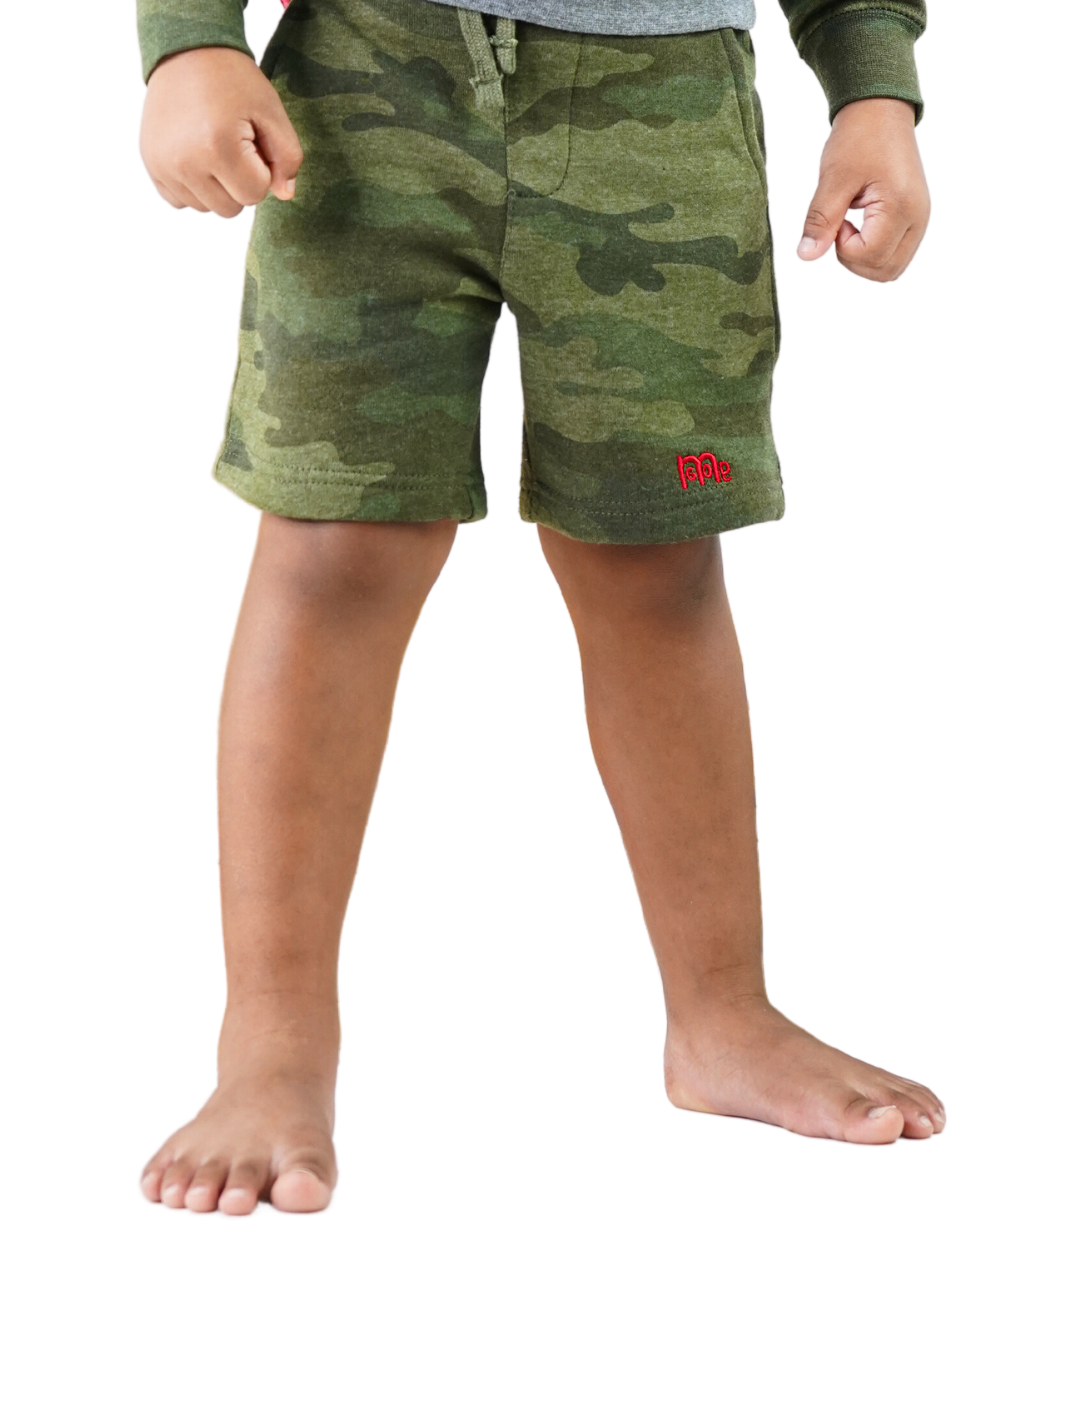 Toddler size Green Camouflage Shorts with elastic waistband, sewn fly detail, jersey-lined front pockets, stylish back pocket, and Red GODinme logo.